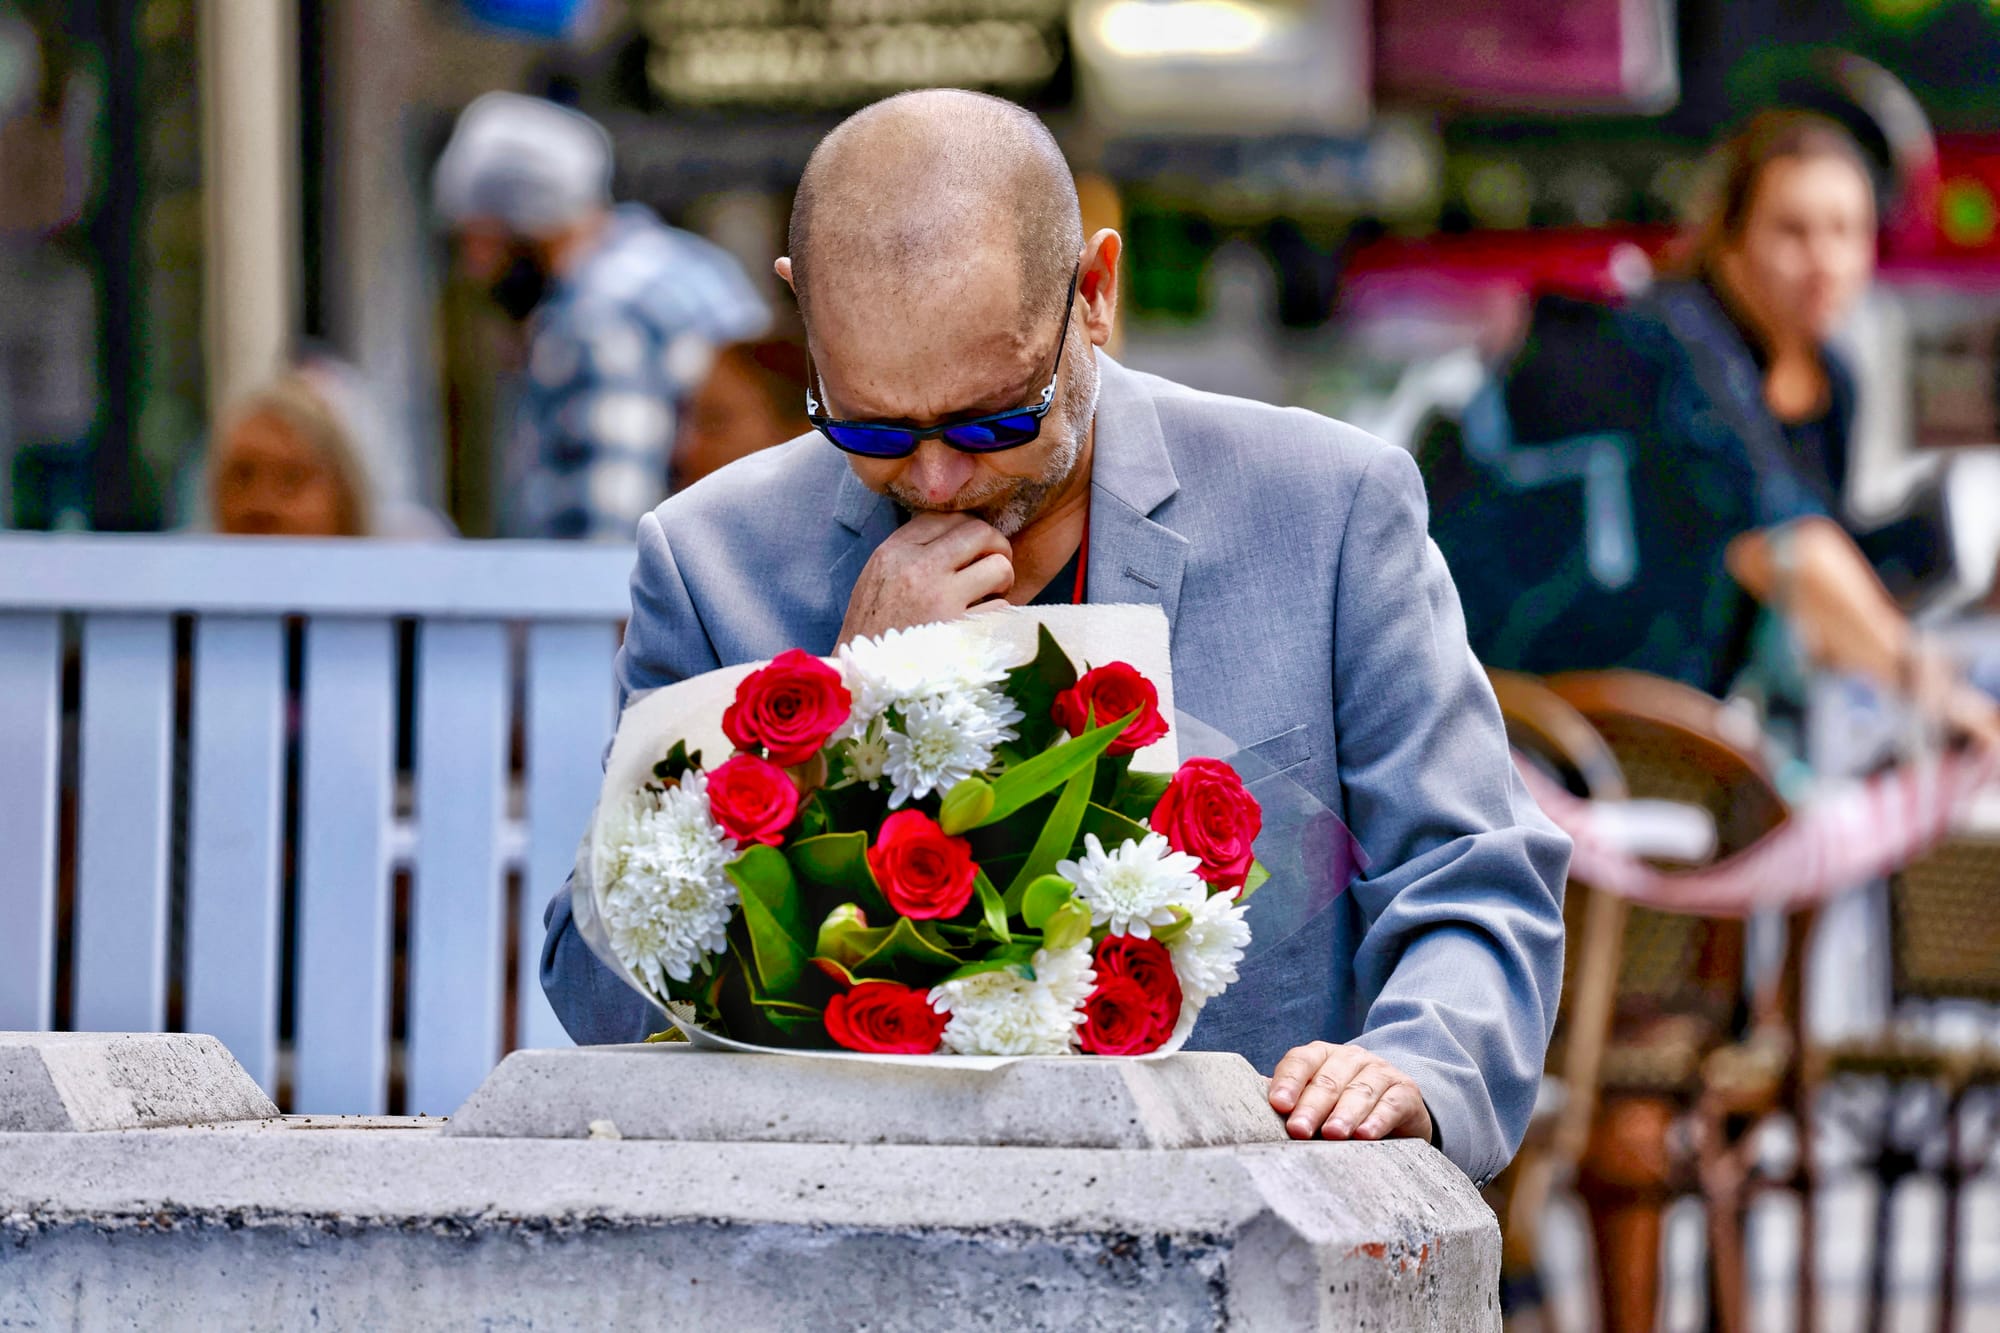 Man lays flowers as a tribute for victims of Sydney mall attack